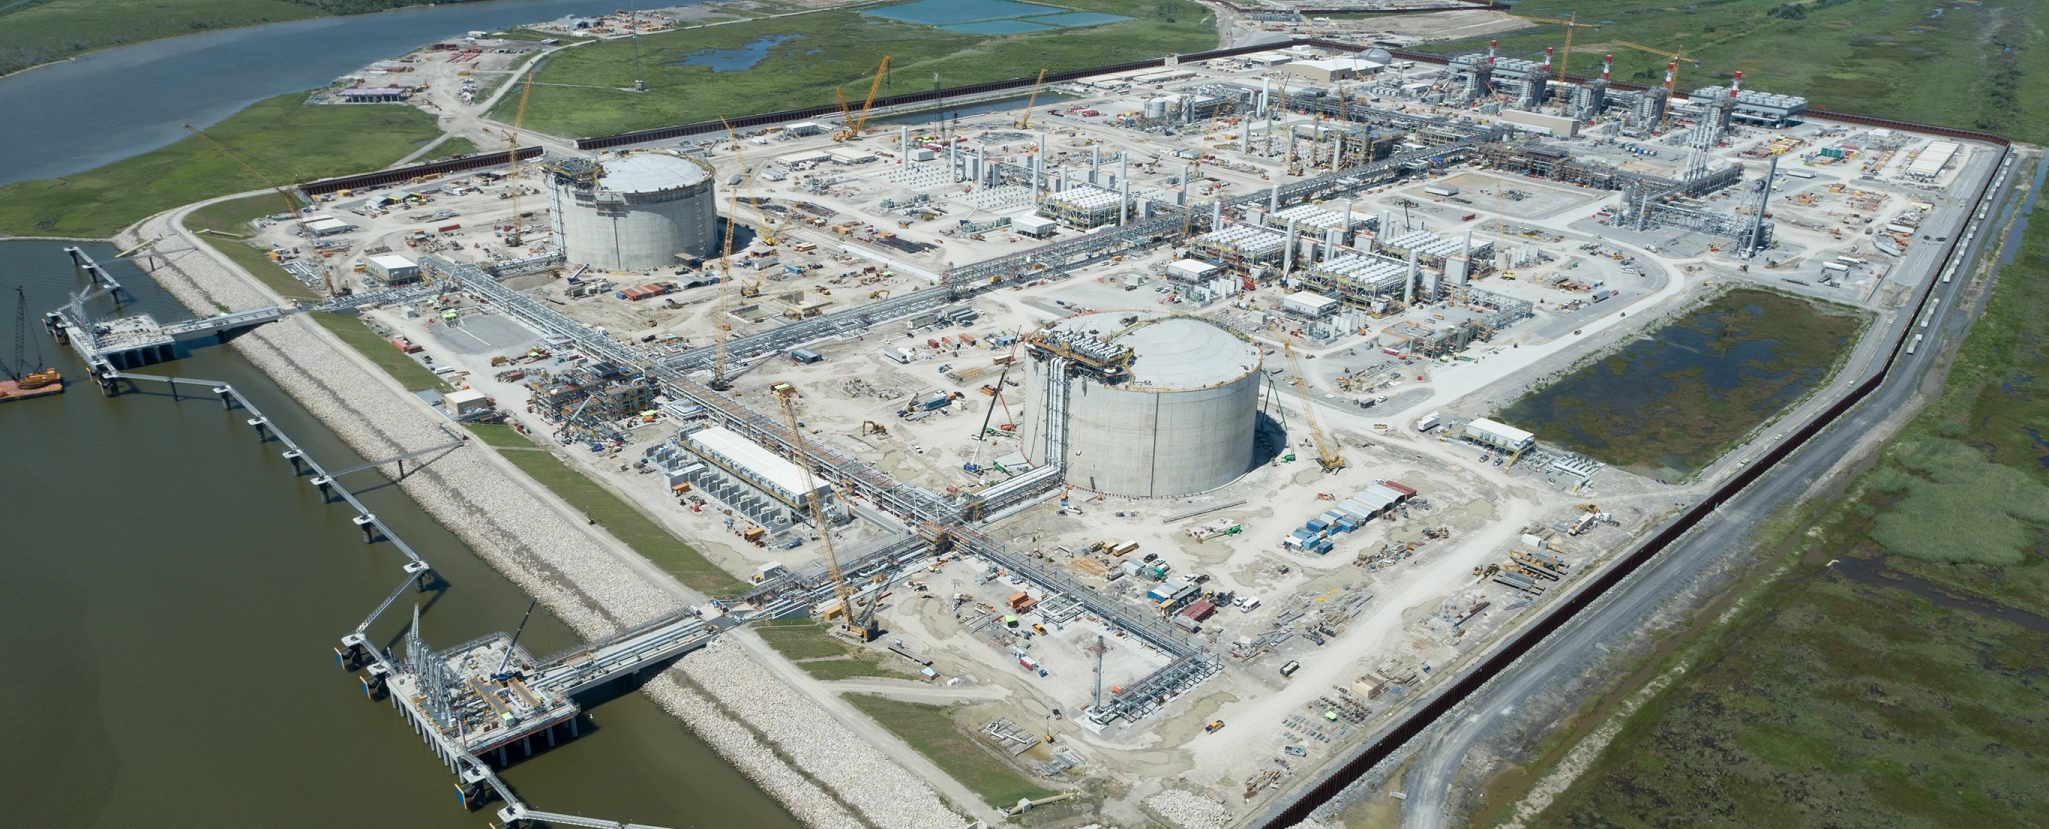 Venture Global LNG secures approval to commission fourth block at Calcasieu Pass